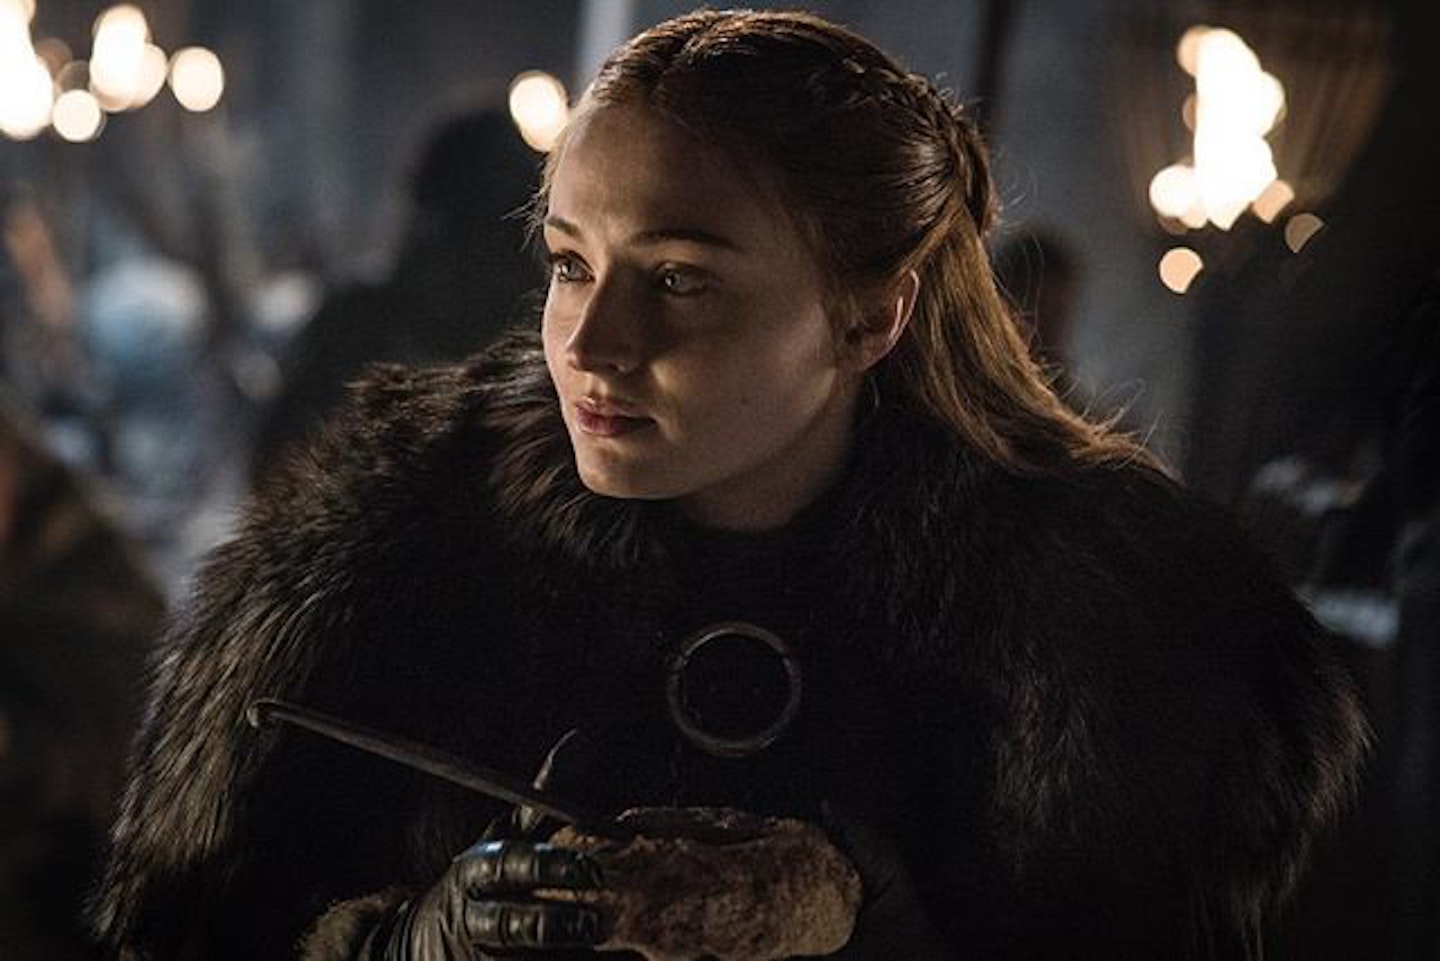 New Game Of Thrones Season 8 images